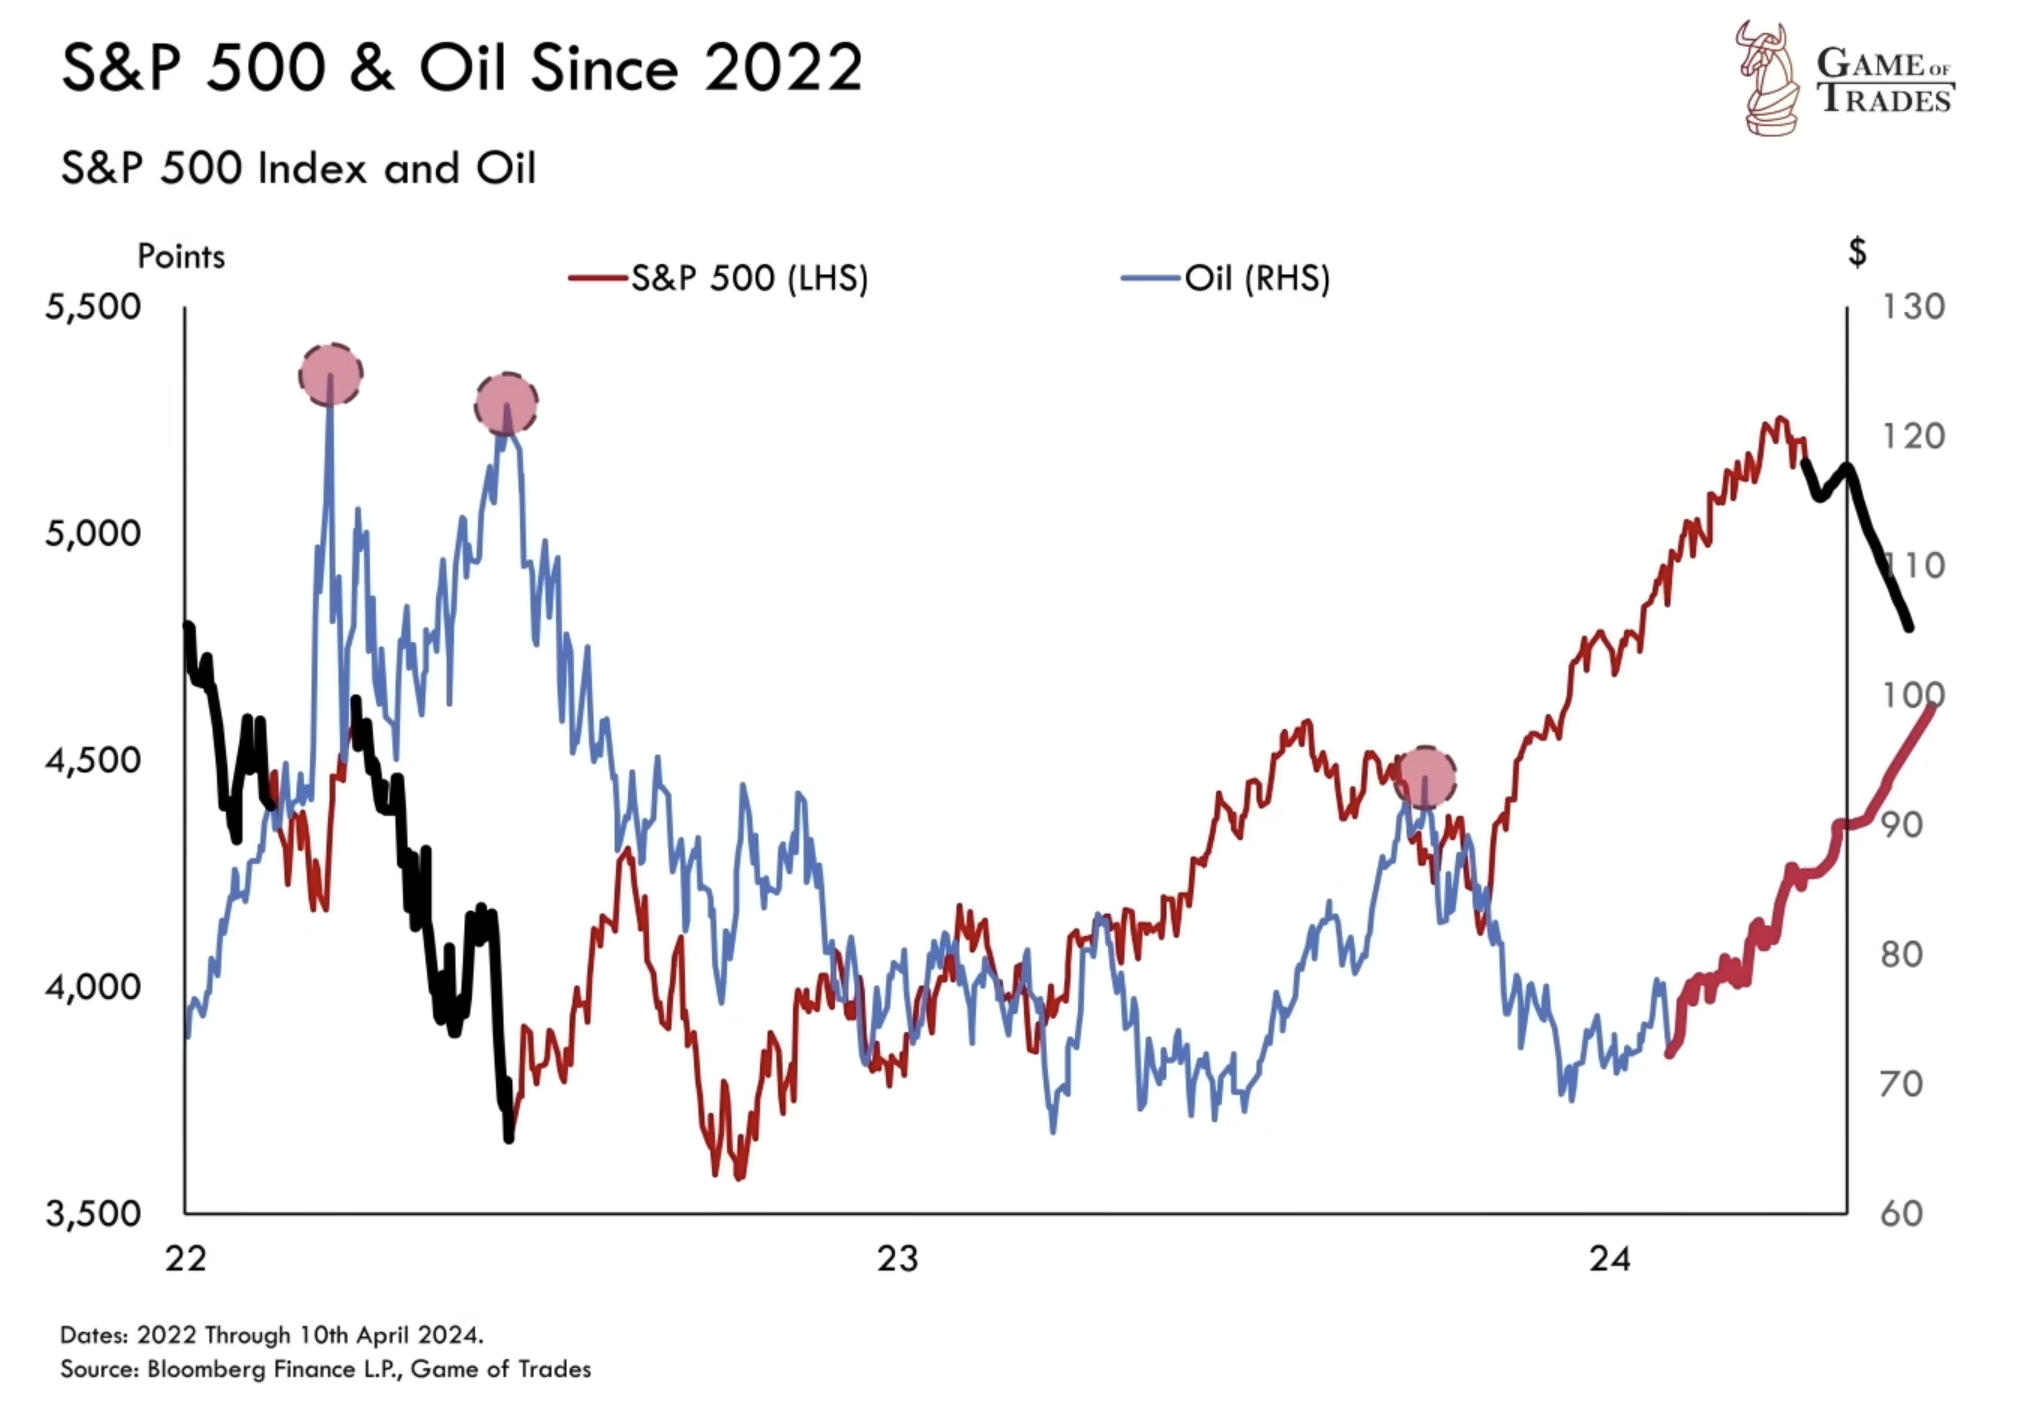 S&P 500 and oil